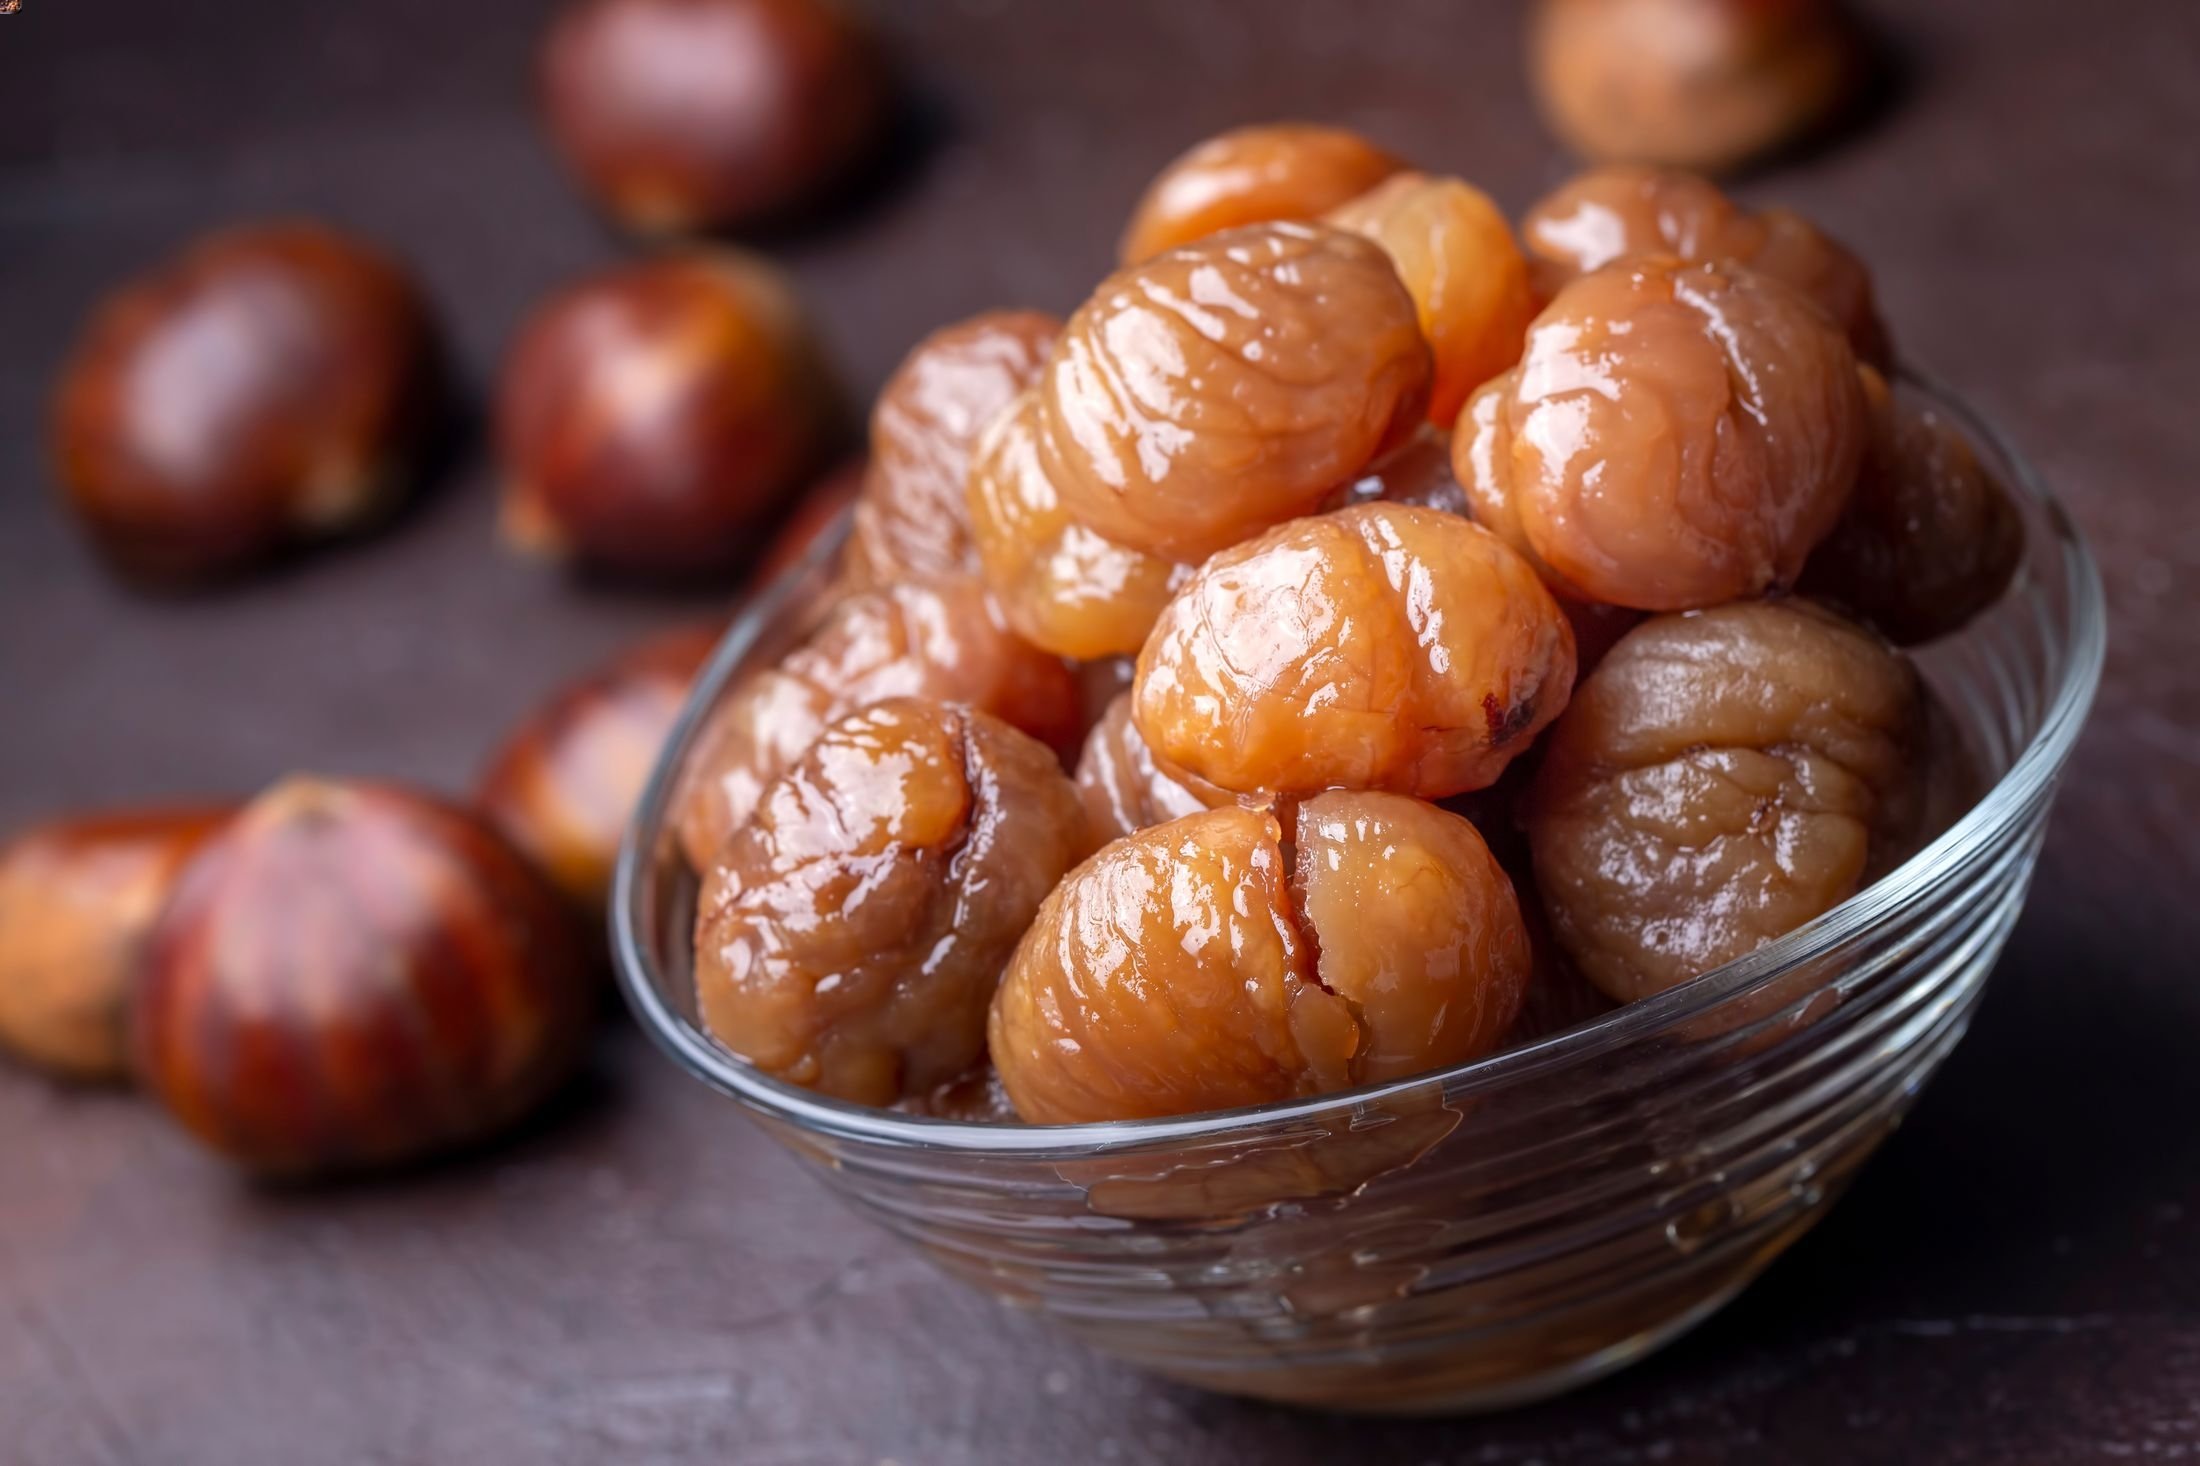 Chestnut candy is one of the most important flavors that come to mind when Bursa is mentioned. (Shutterstock Photo)